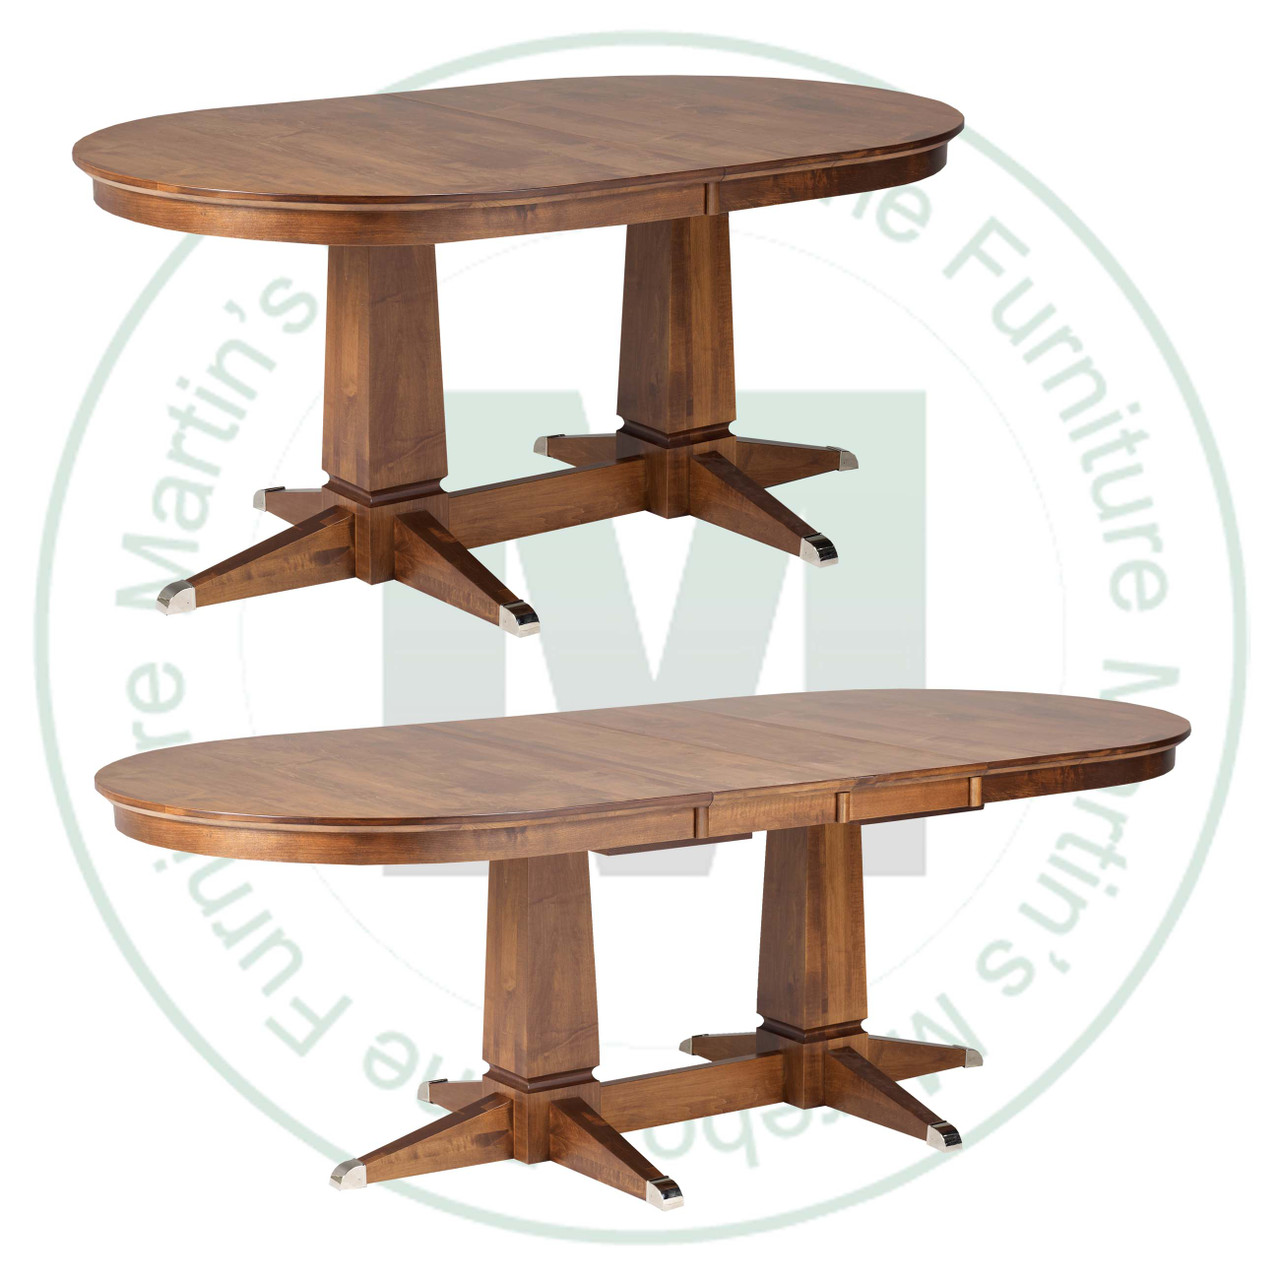 Maple Sweden Double Pedestal Table 42''D x 96''W x 30''H With 4 - 12'' Leaves